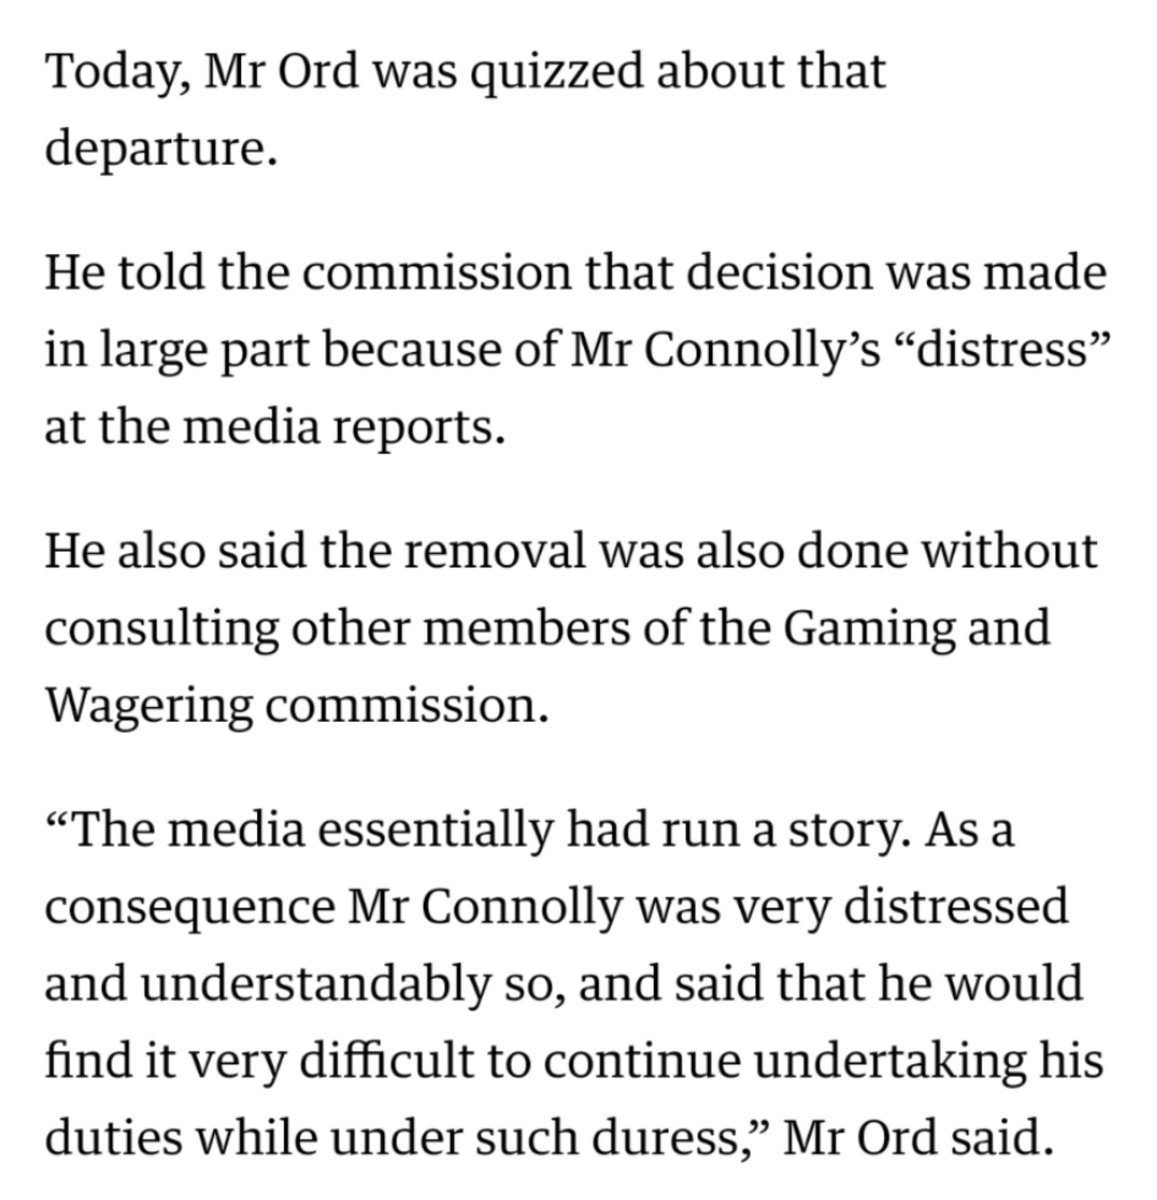 I don't know if I can make a submission to the Royal Commission or if the Commissioners even care, but as the bloke who broke the story, let me tell you the sequence of events, because this evidence by Ord is inaccurate.